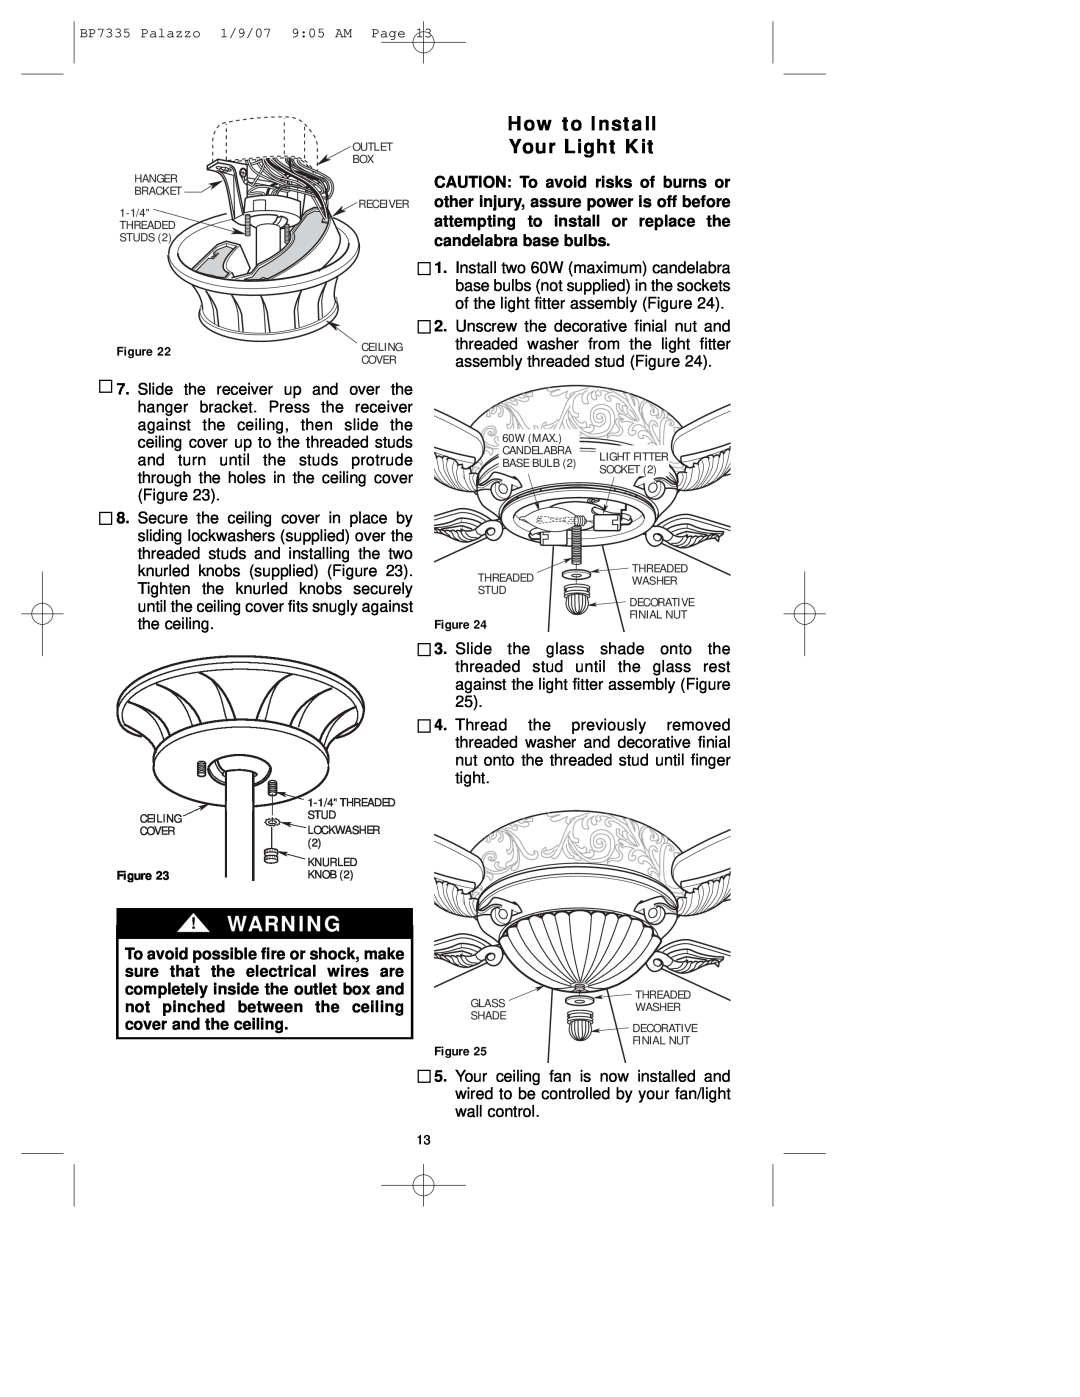 Emerson CF943 owner manual How to Install Your Light Kit 